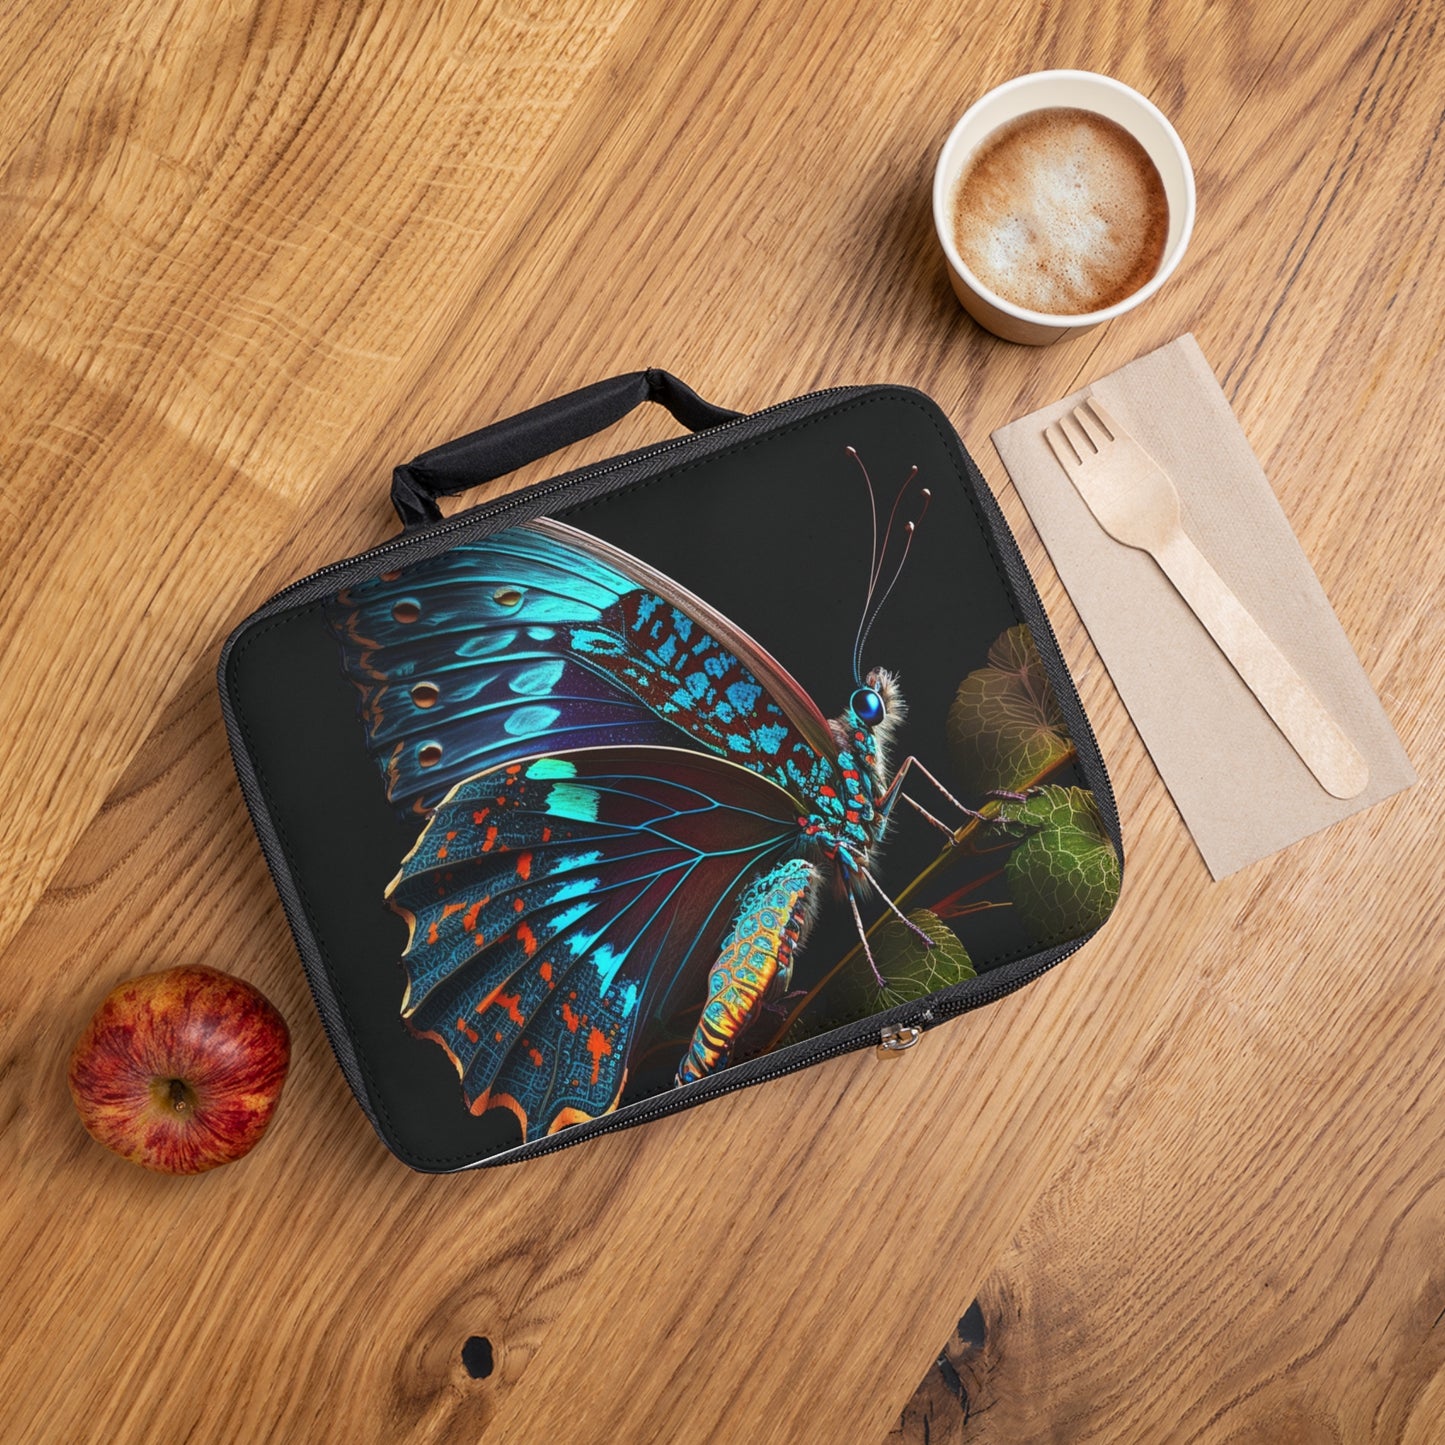 Lunch Bag Hue Neon Butterfly 2